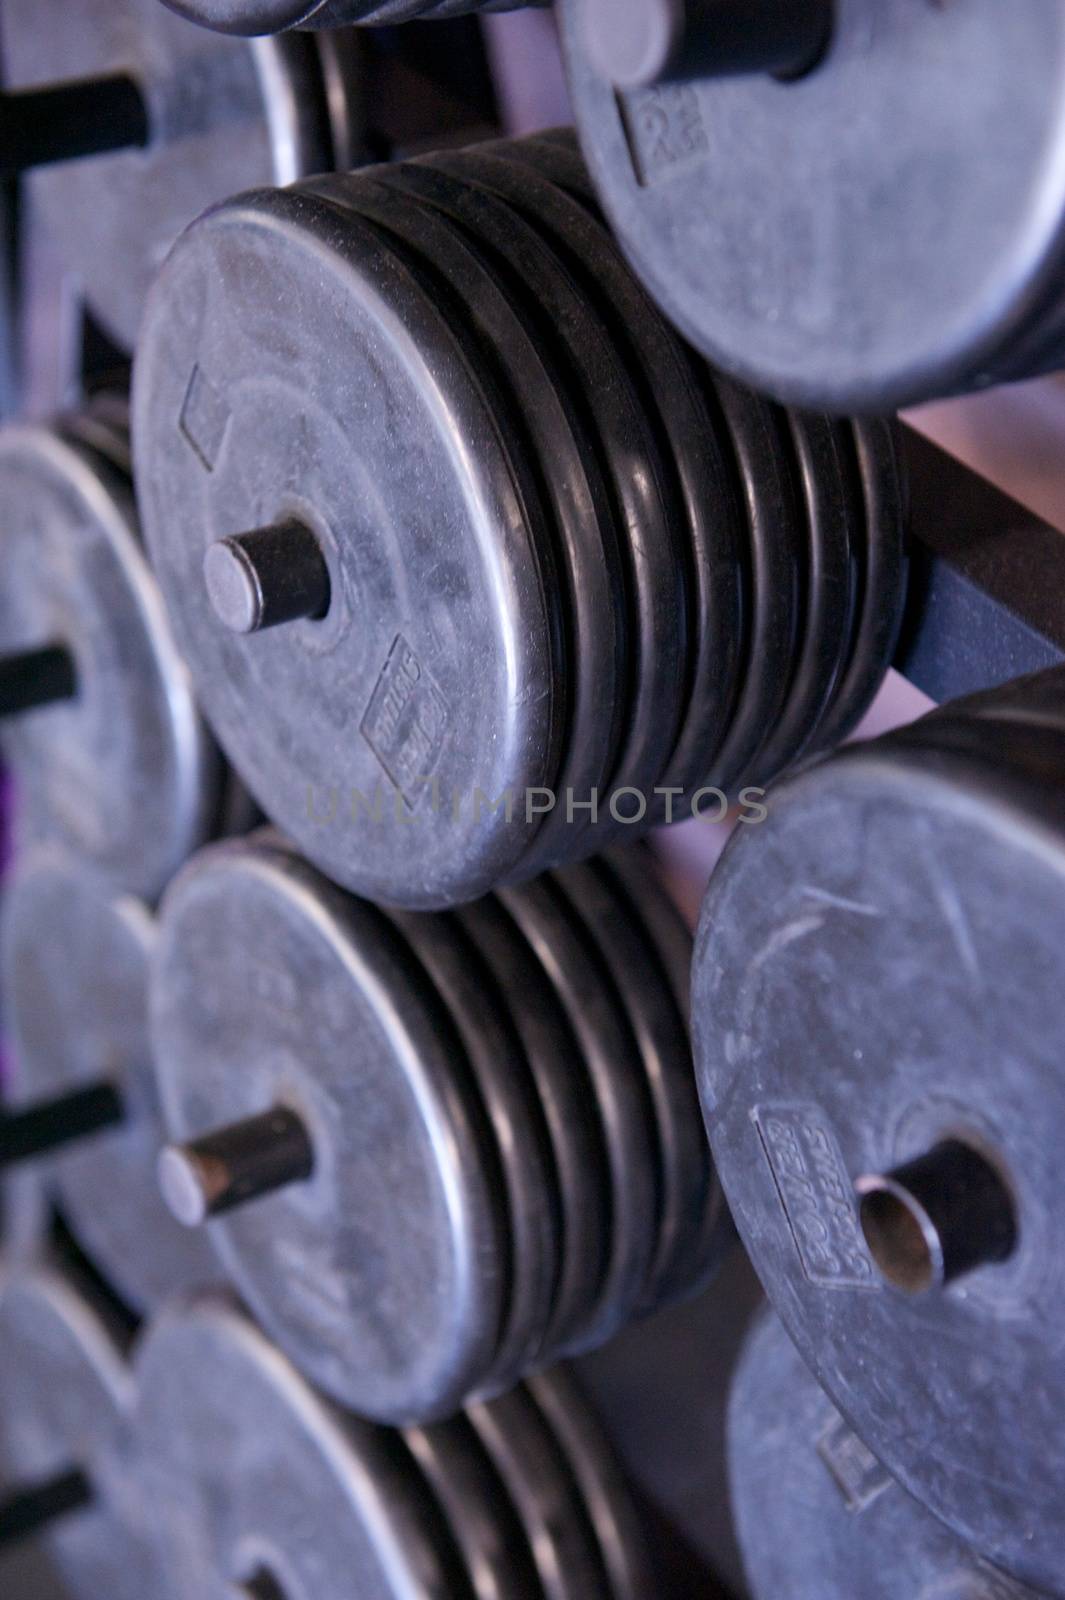 Image of a full weight rack for free weights at a commercial gym